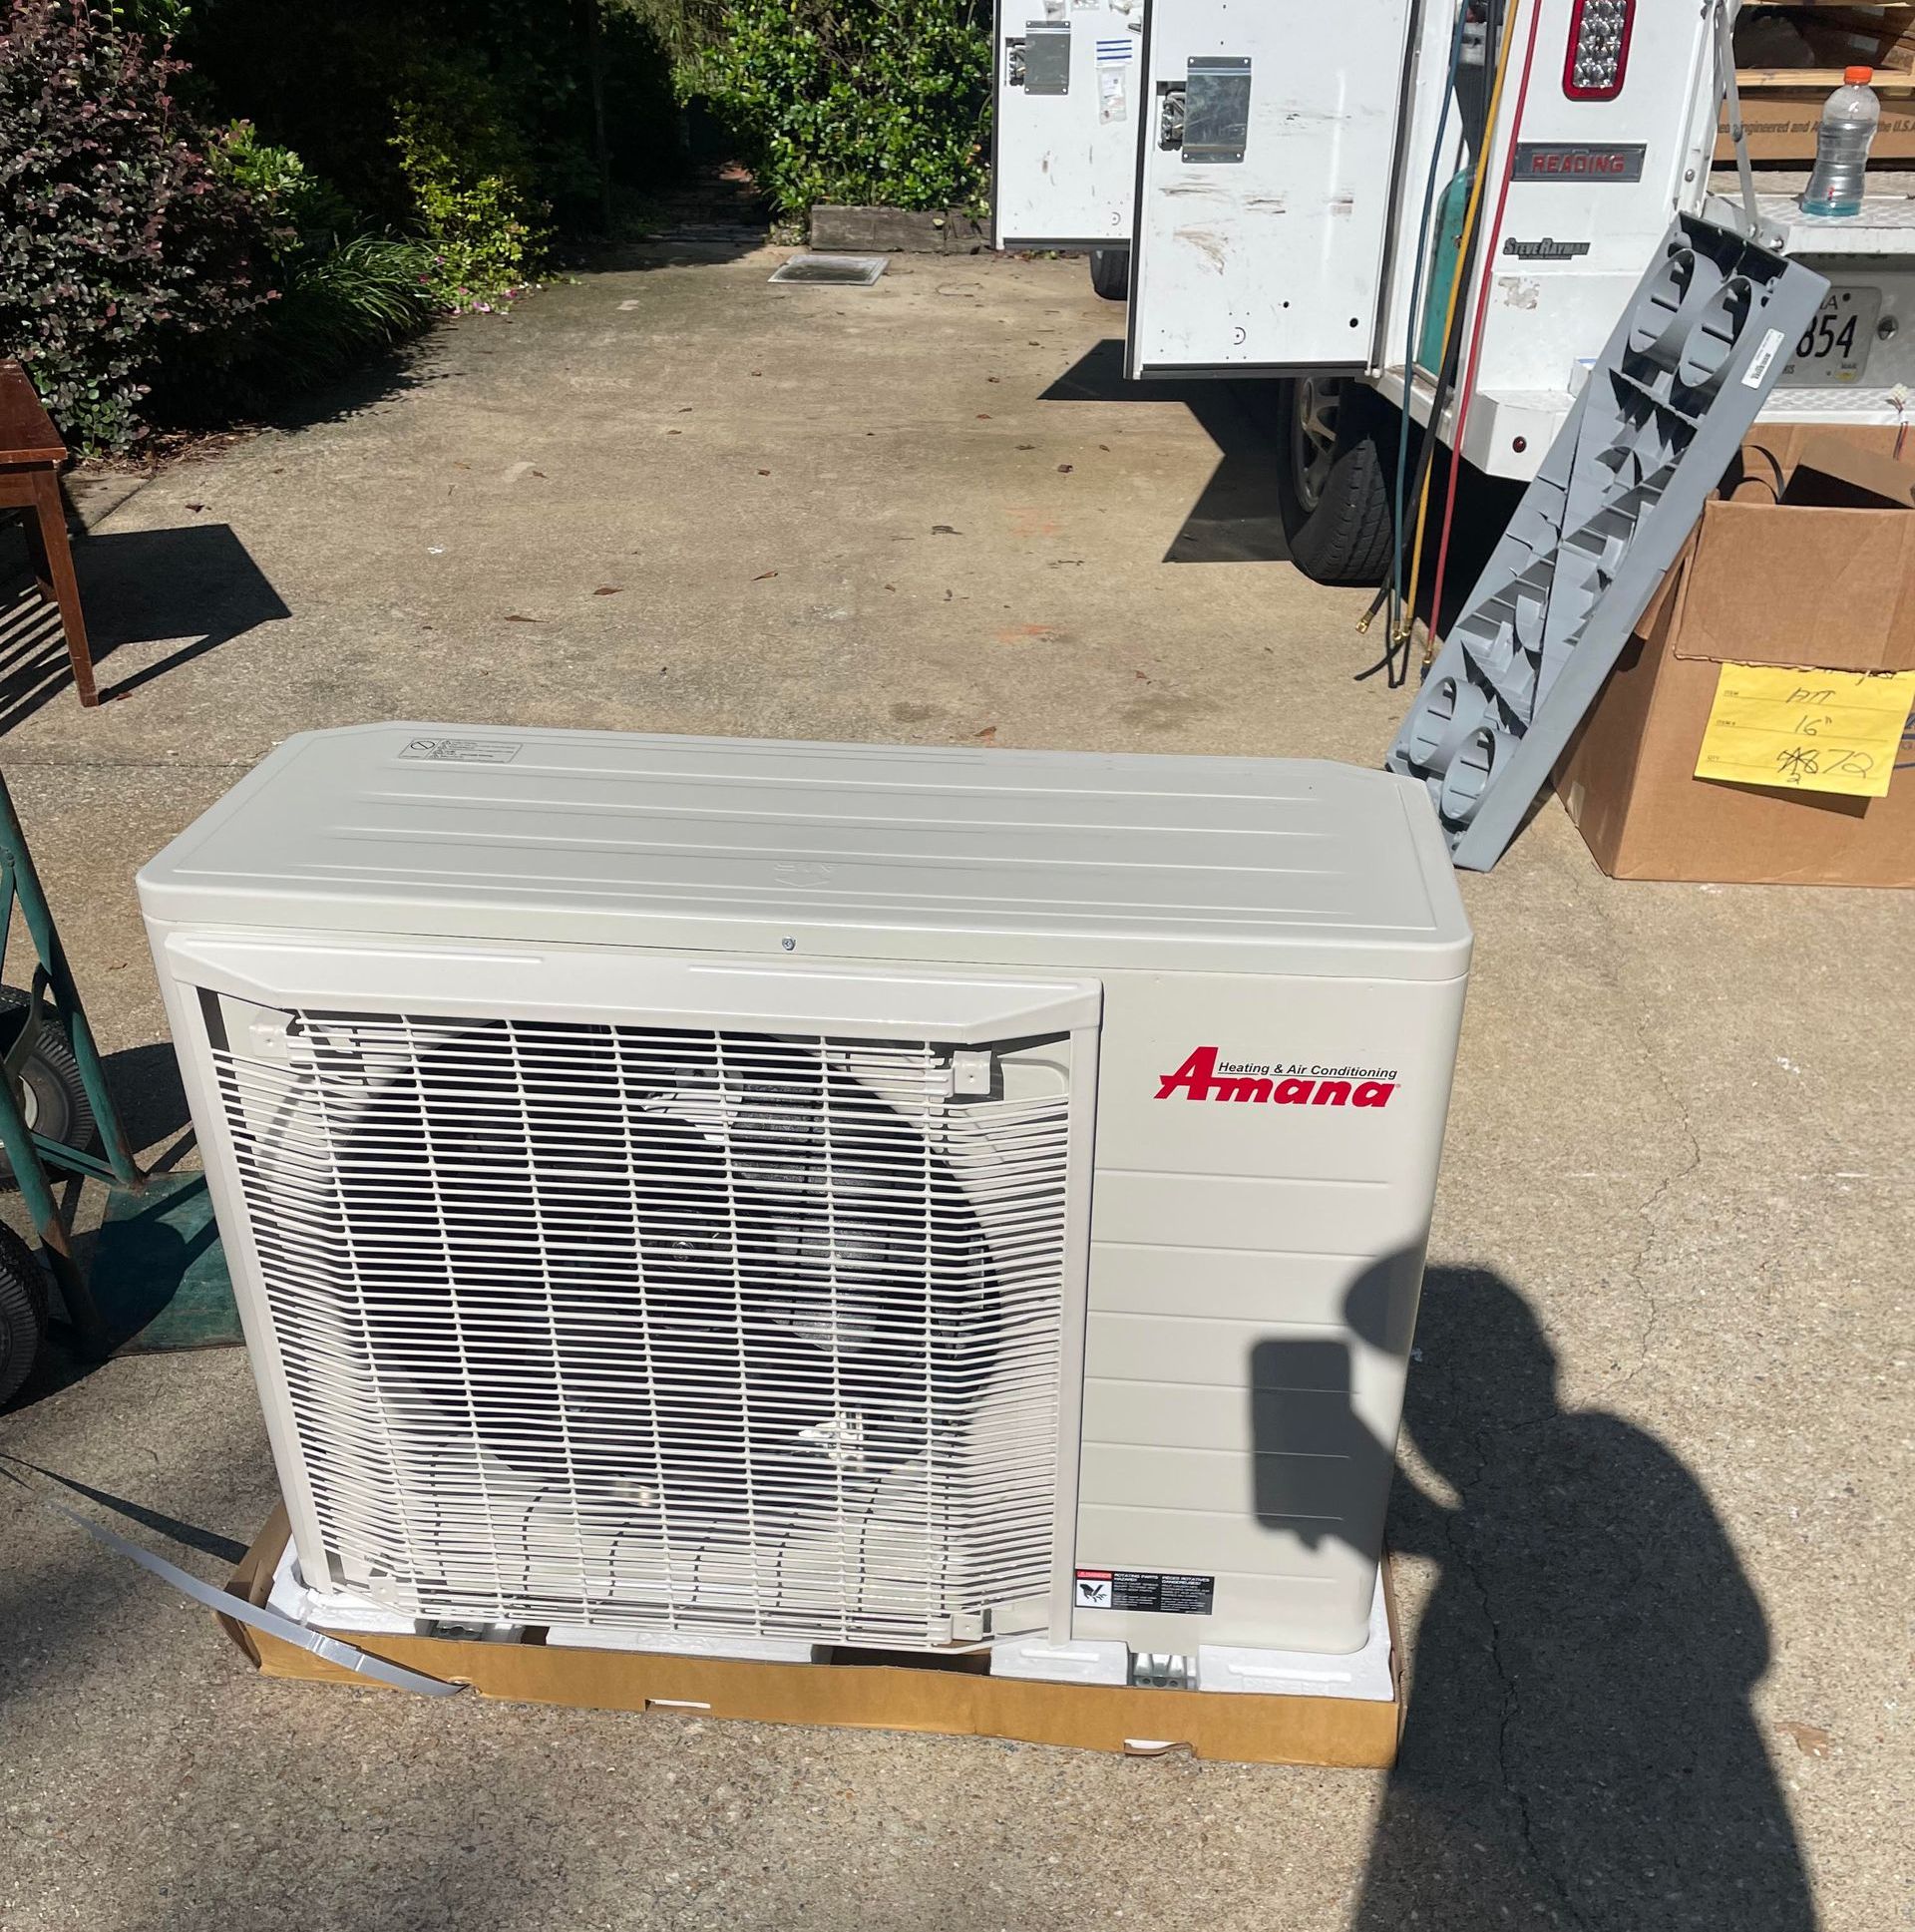 A amana air conditioner is sitting on a box in a driveway